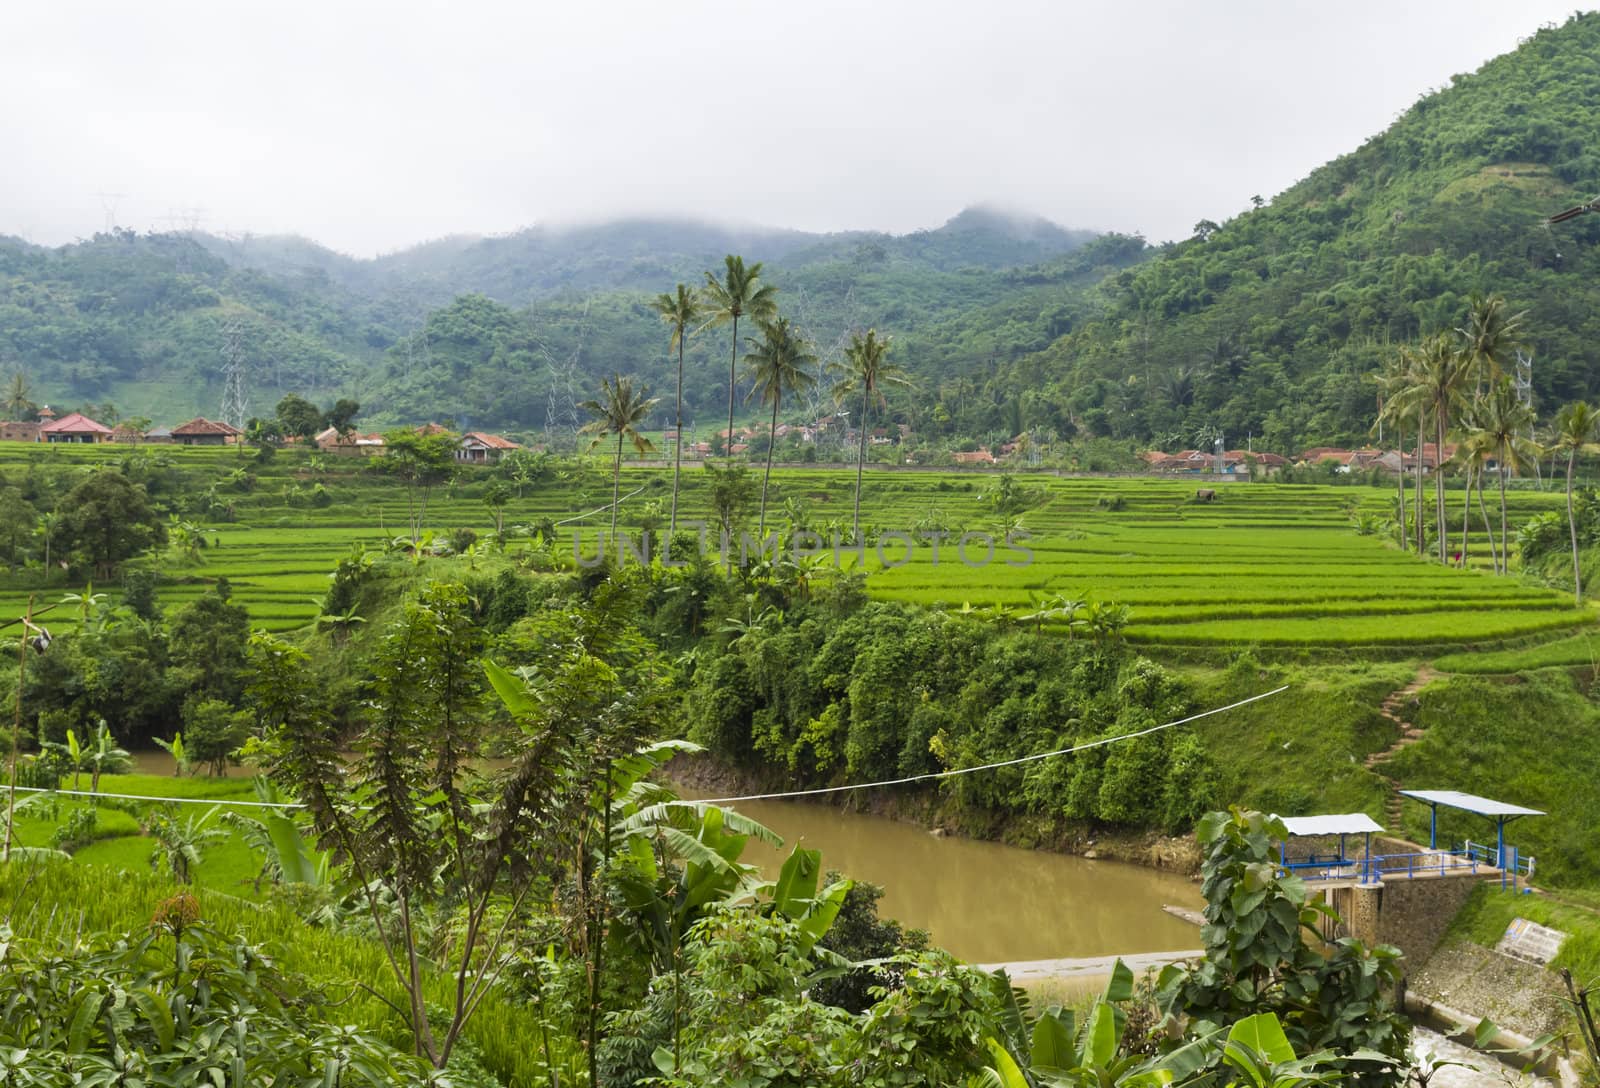 Paddy Field By The Mountain by azamshah72